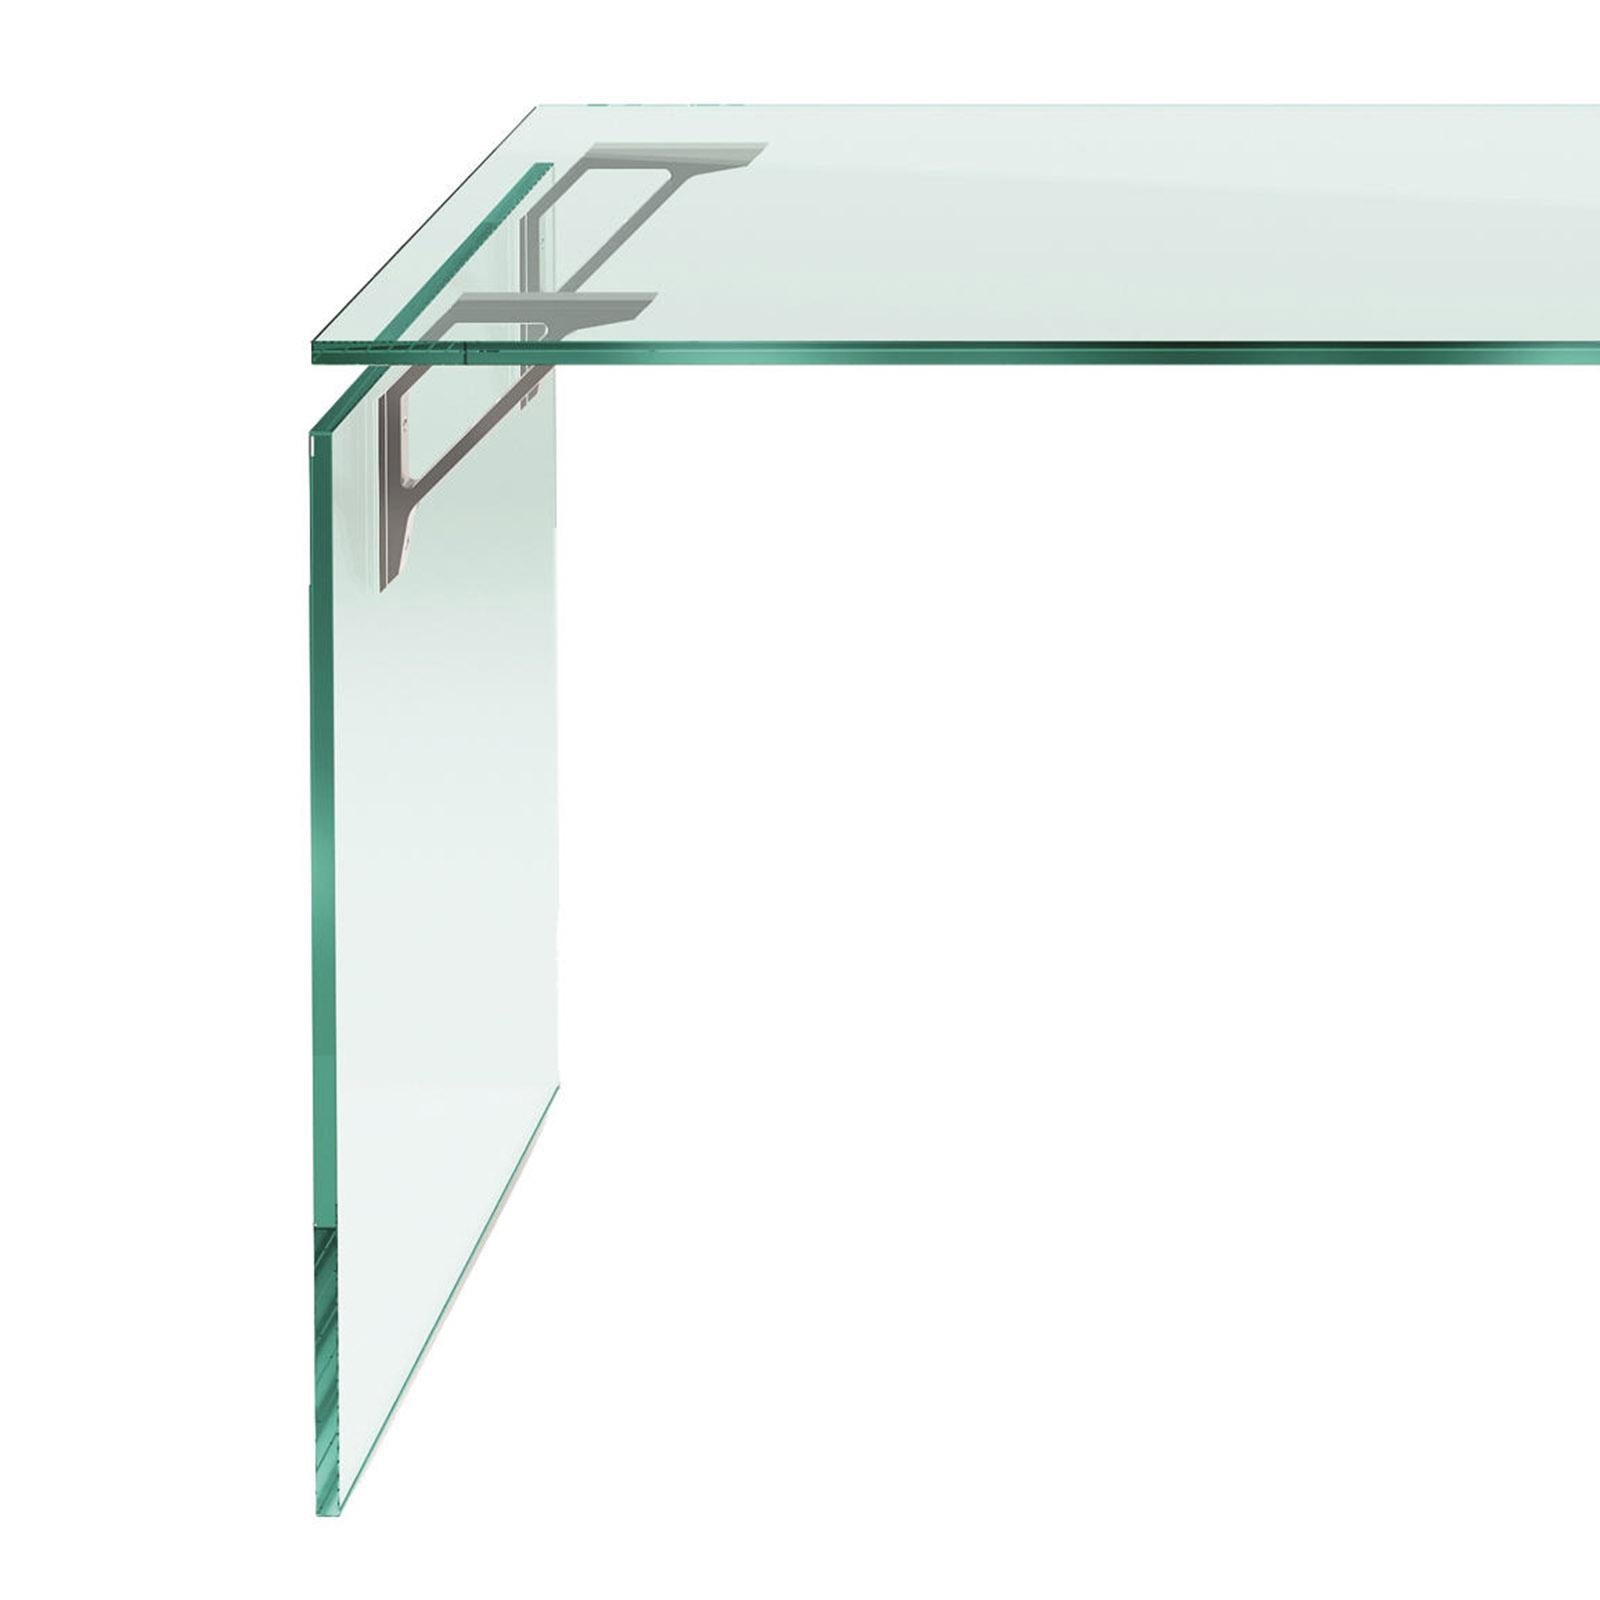 Desk shine with tempered and welded glass,
15mm thickness with mounting brackets
in polished aluminum and steel.
Available in:
L 120 x D 60 x H 73cm, price: 3400,00€
L 130 x D 60 x H 73cm, price: 3600,00€
L 140 x D 70 x H 73cm, price: 3900,00€
L 160